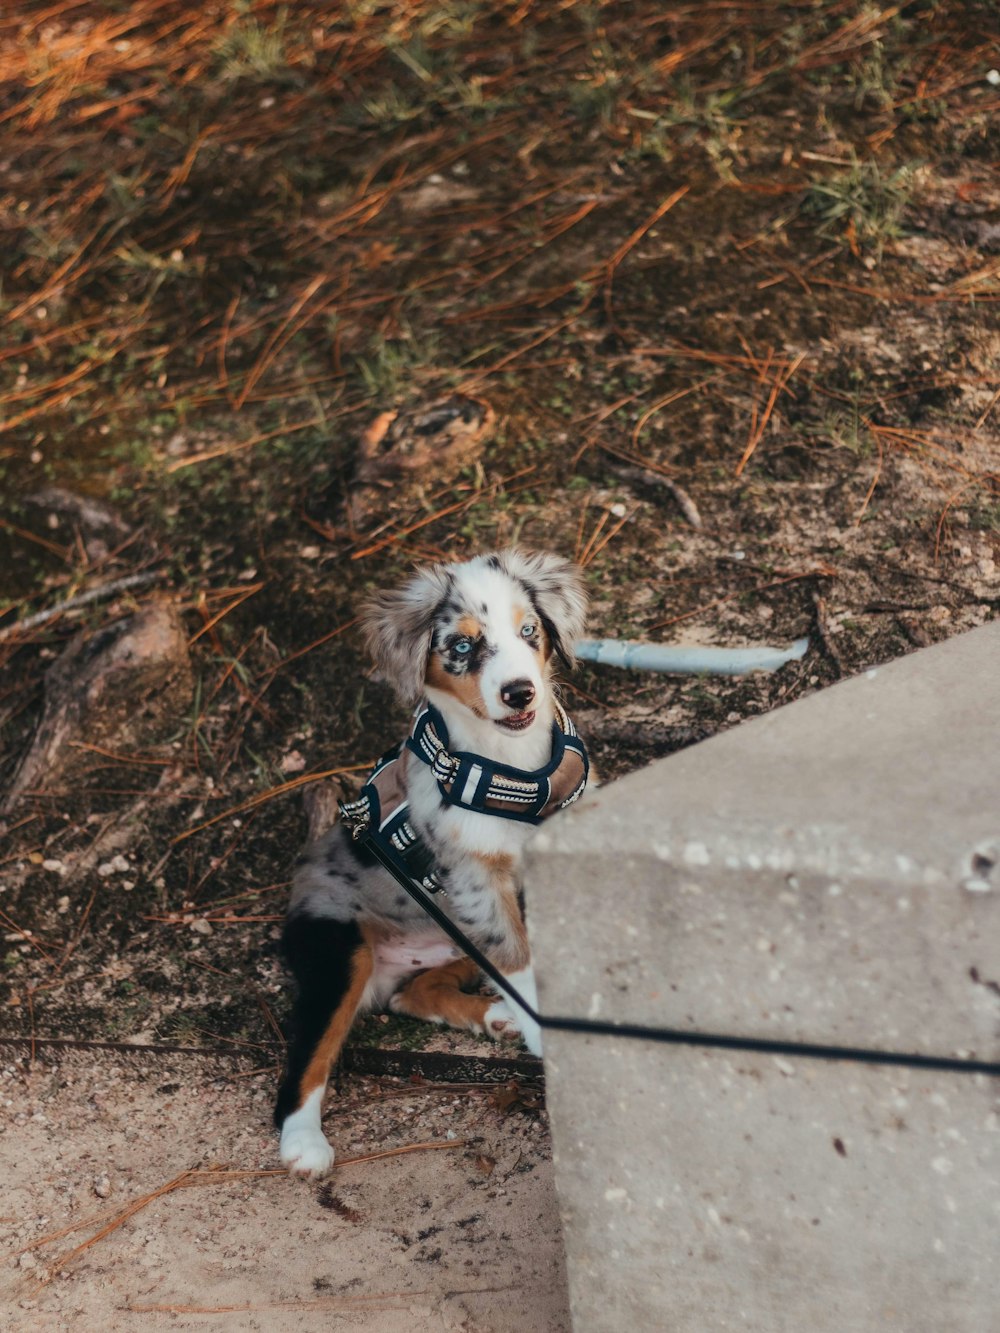 a small dog wearing a harness on a leash